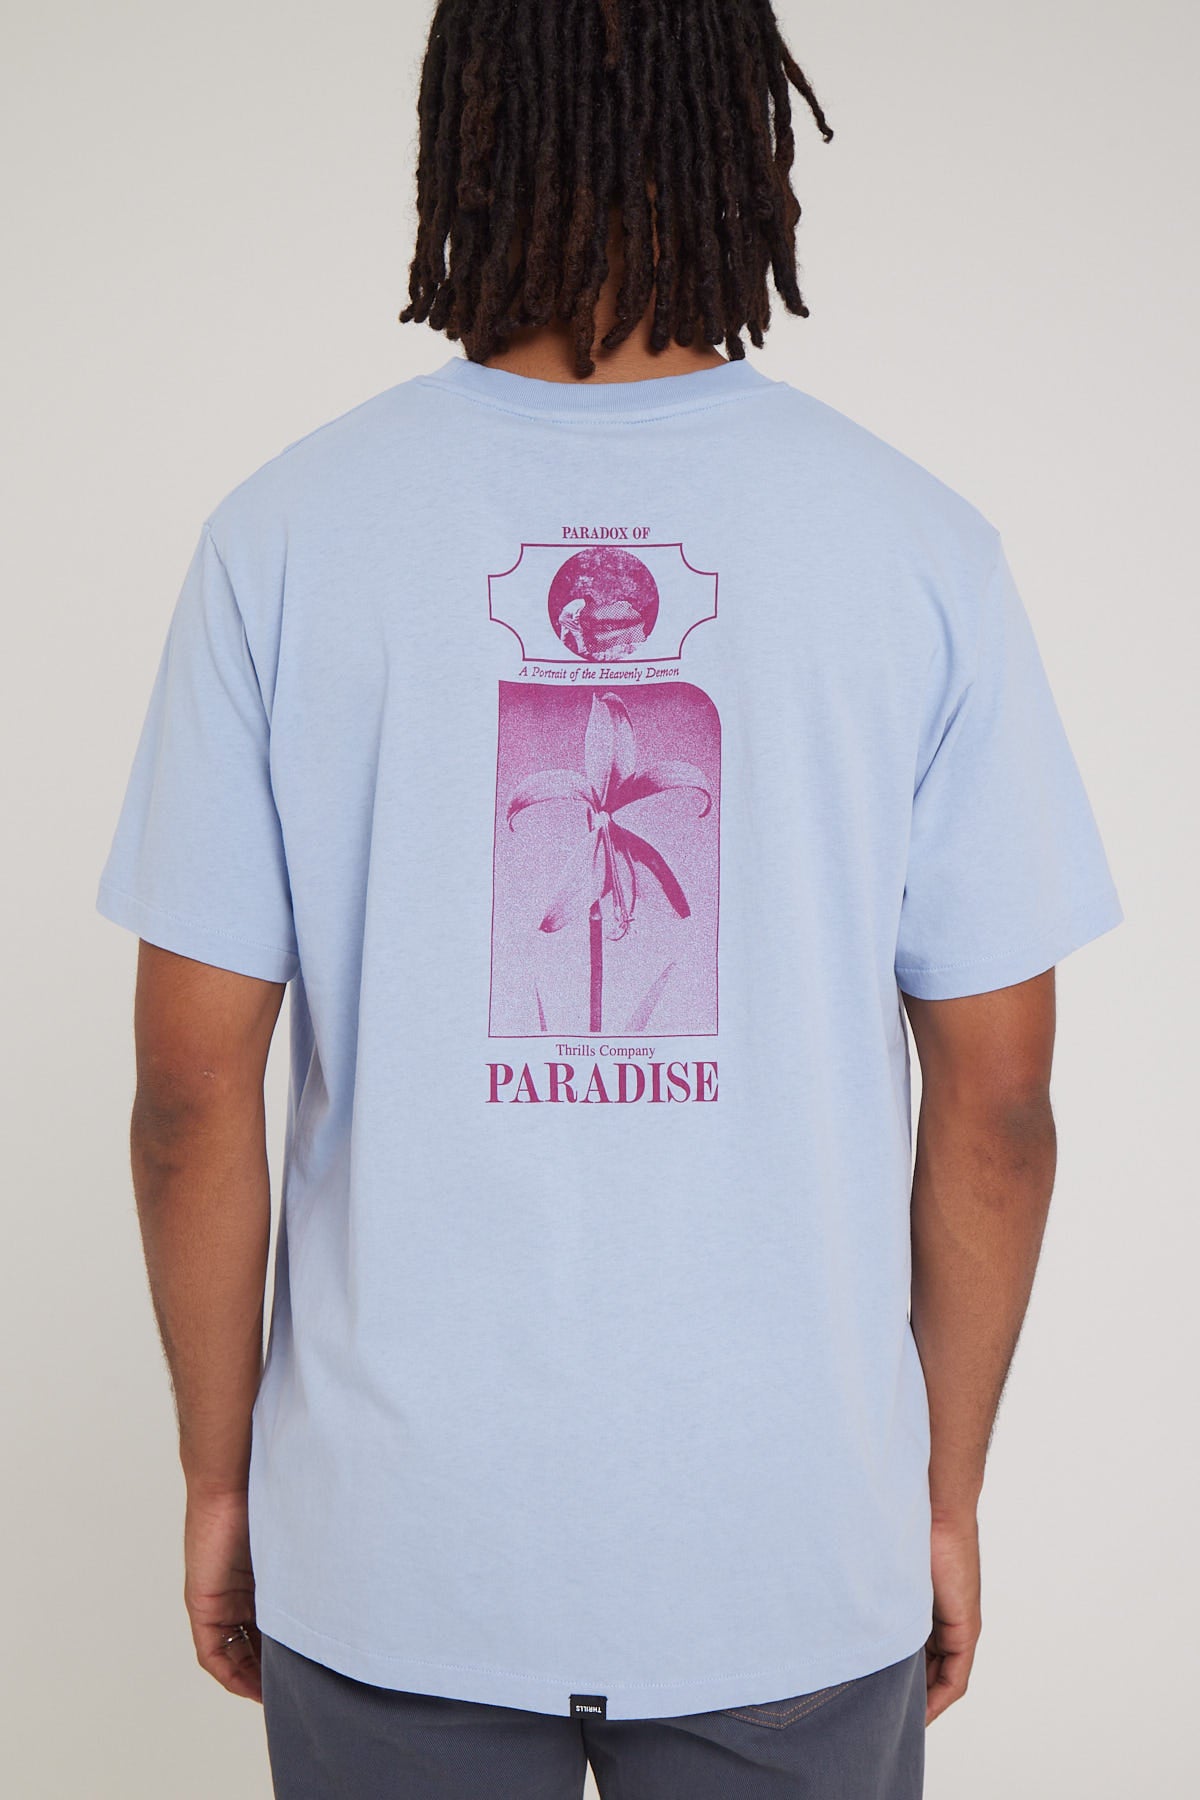 Thrills Portrait Of Paradise Merch Fit Tee Sky Blue – Universal Store